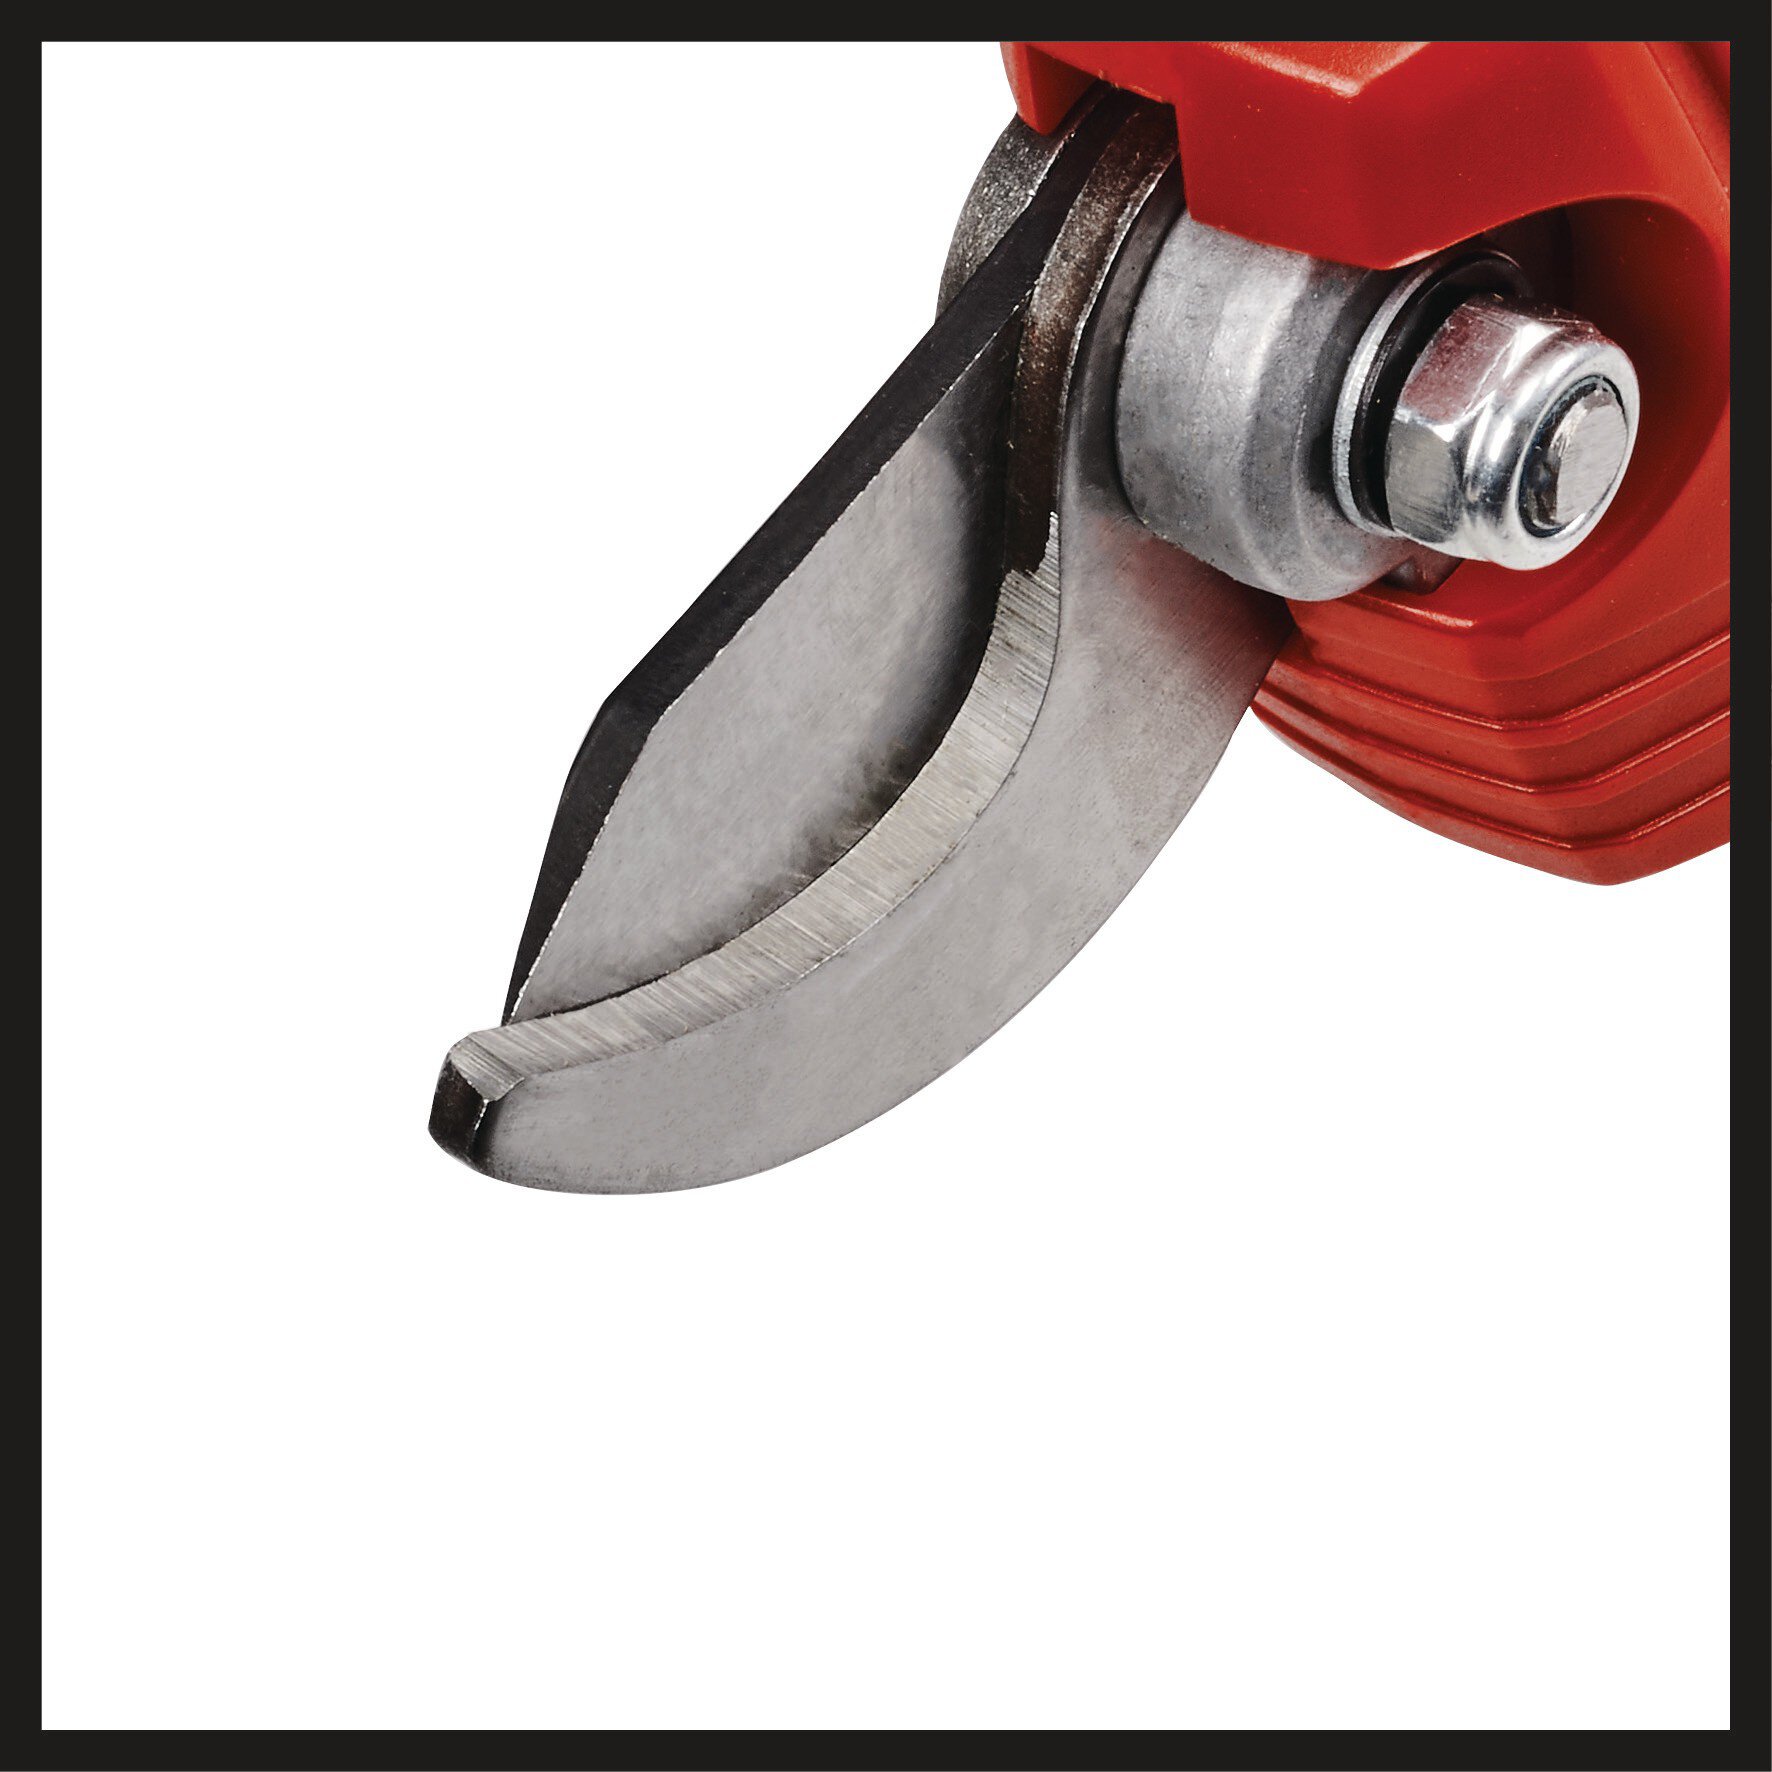 einhell-expert-cordless-pruning-shears-3408300-detail_image-001